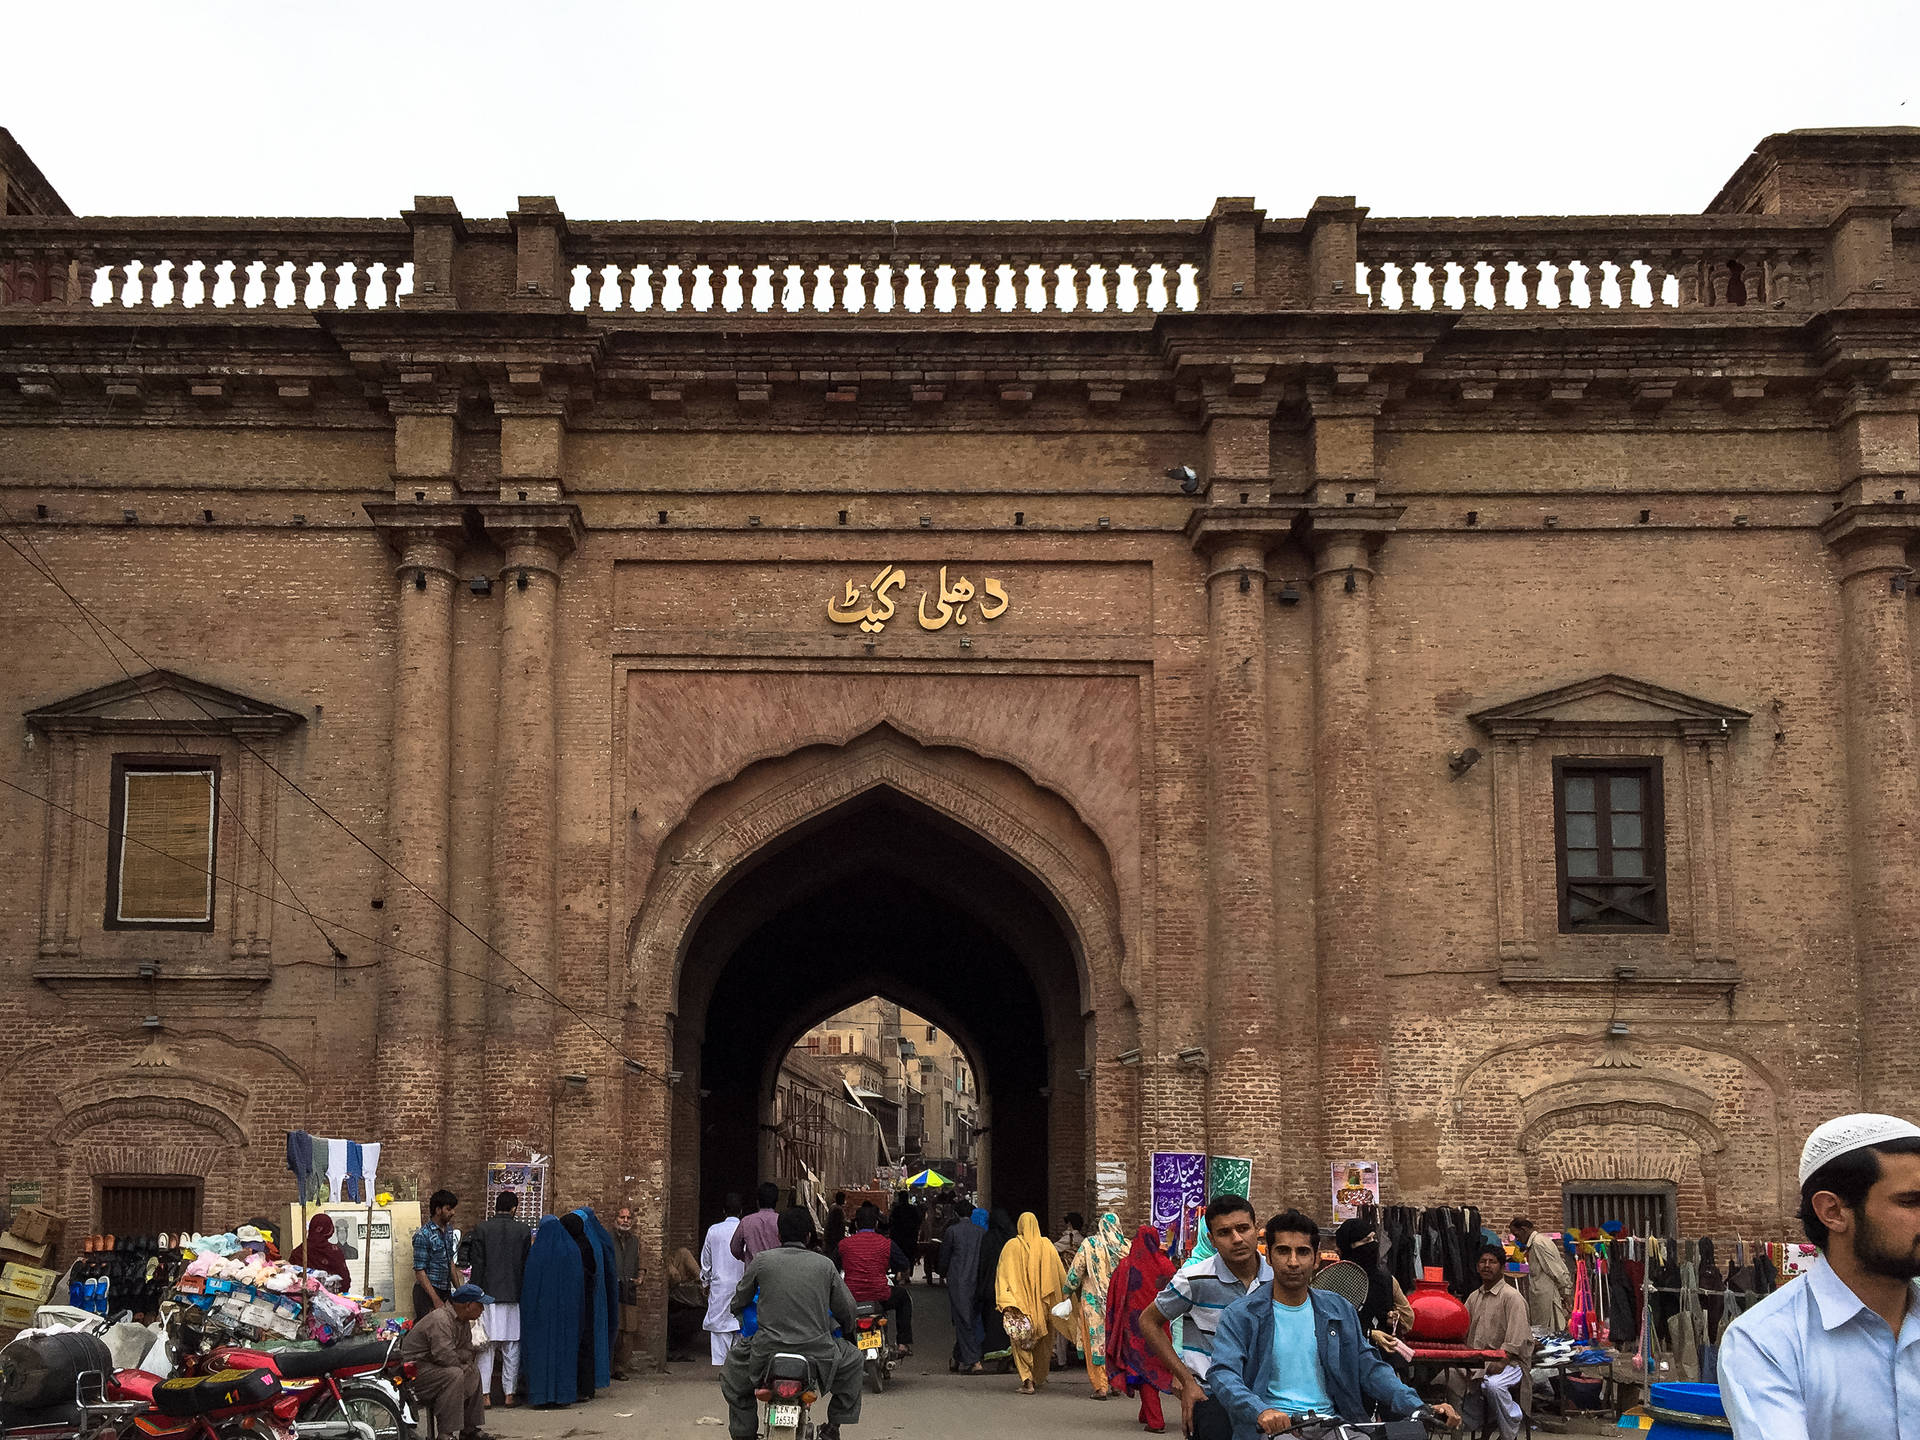 Caption: Sights And Wonders Of Lahore: Delhi Gate Background